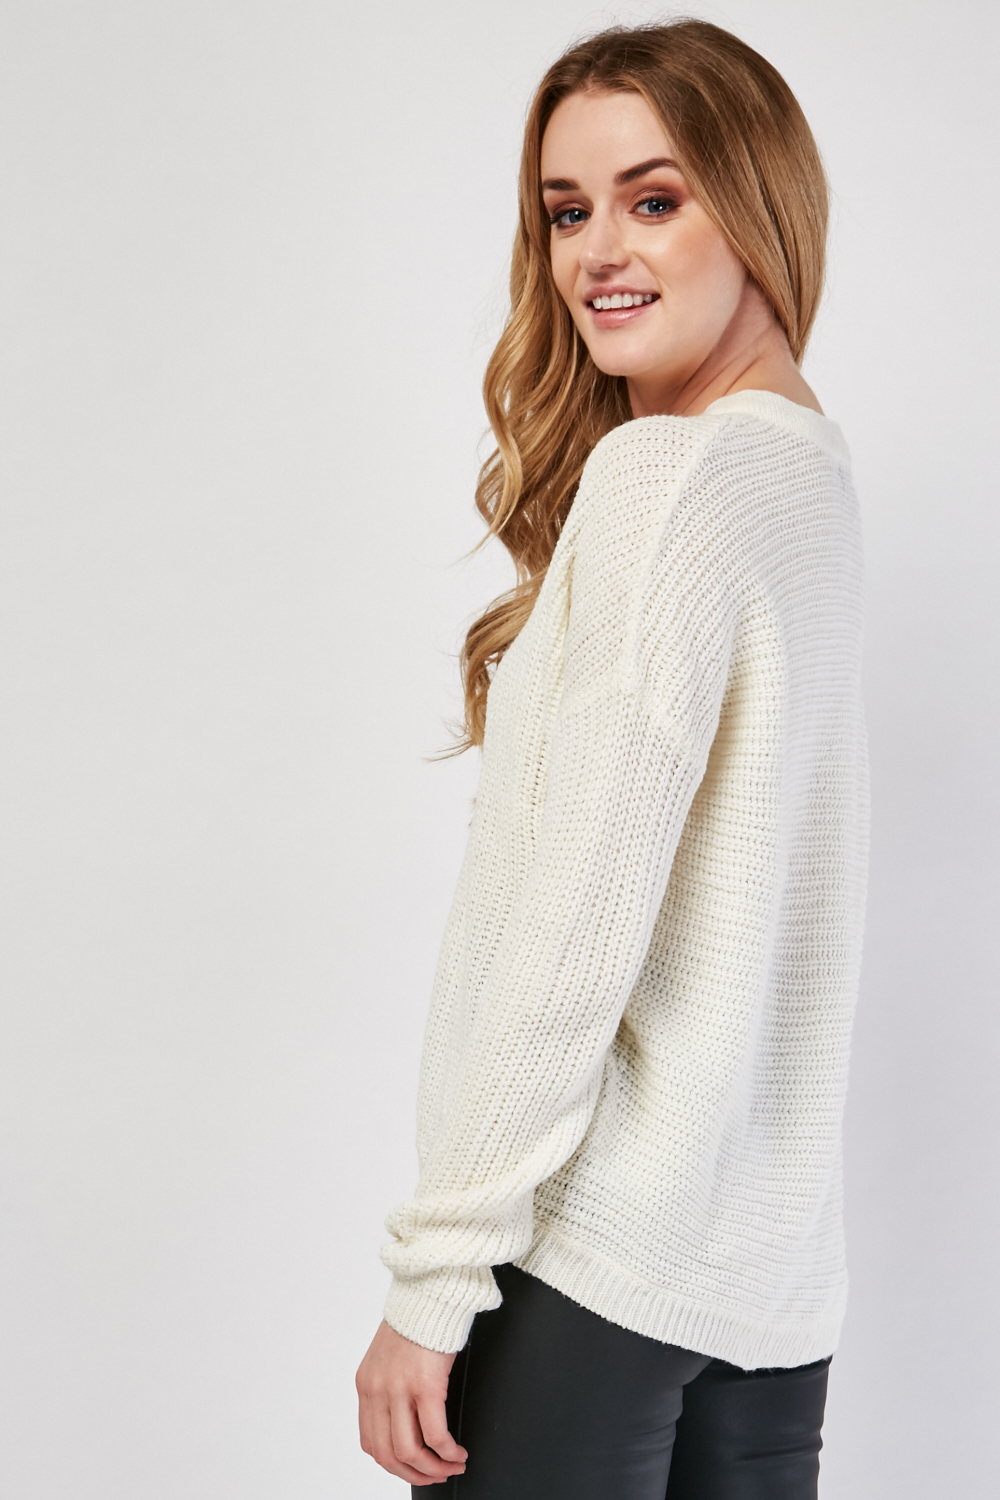 Lace Up Chunky Knit Jumper - Just $7